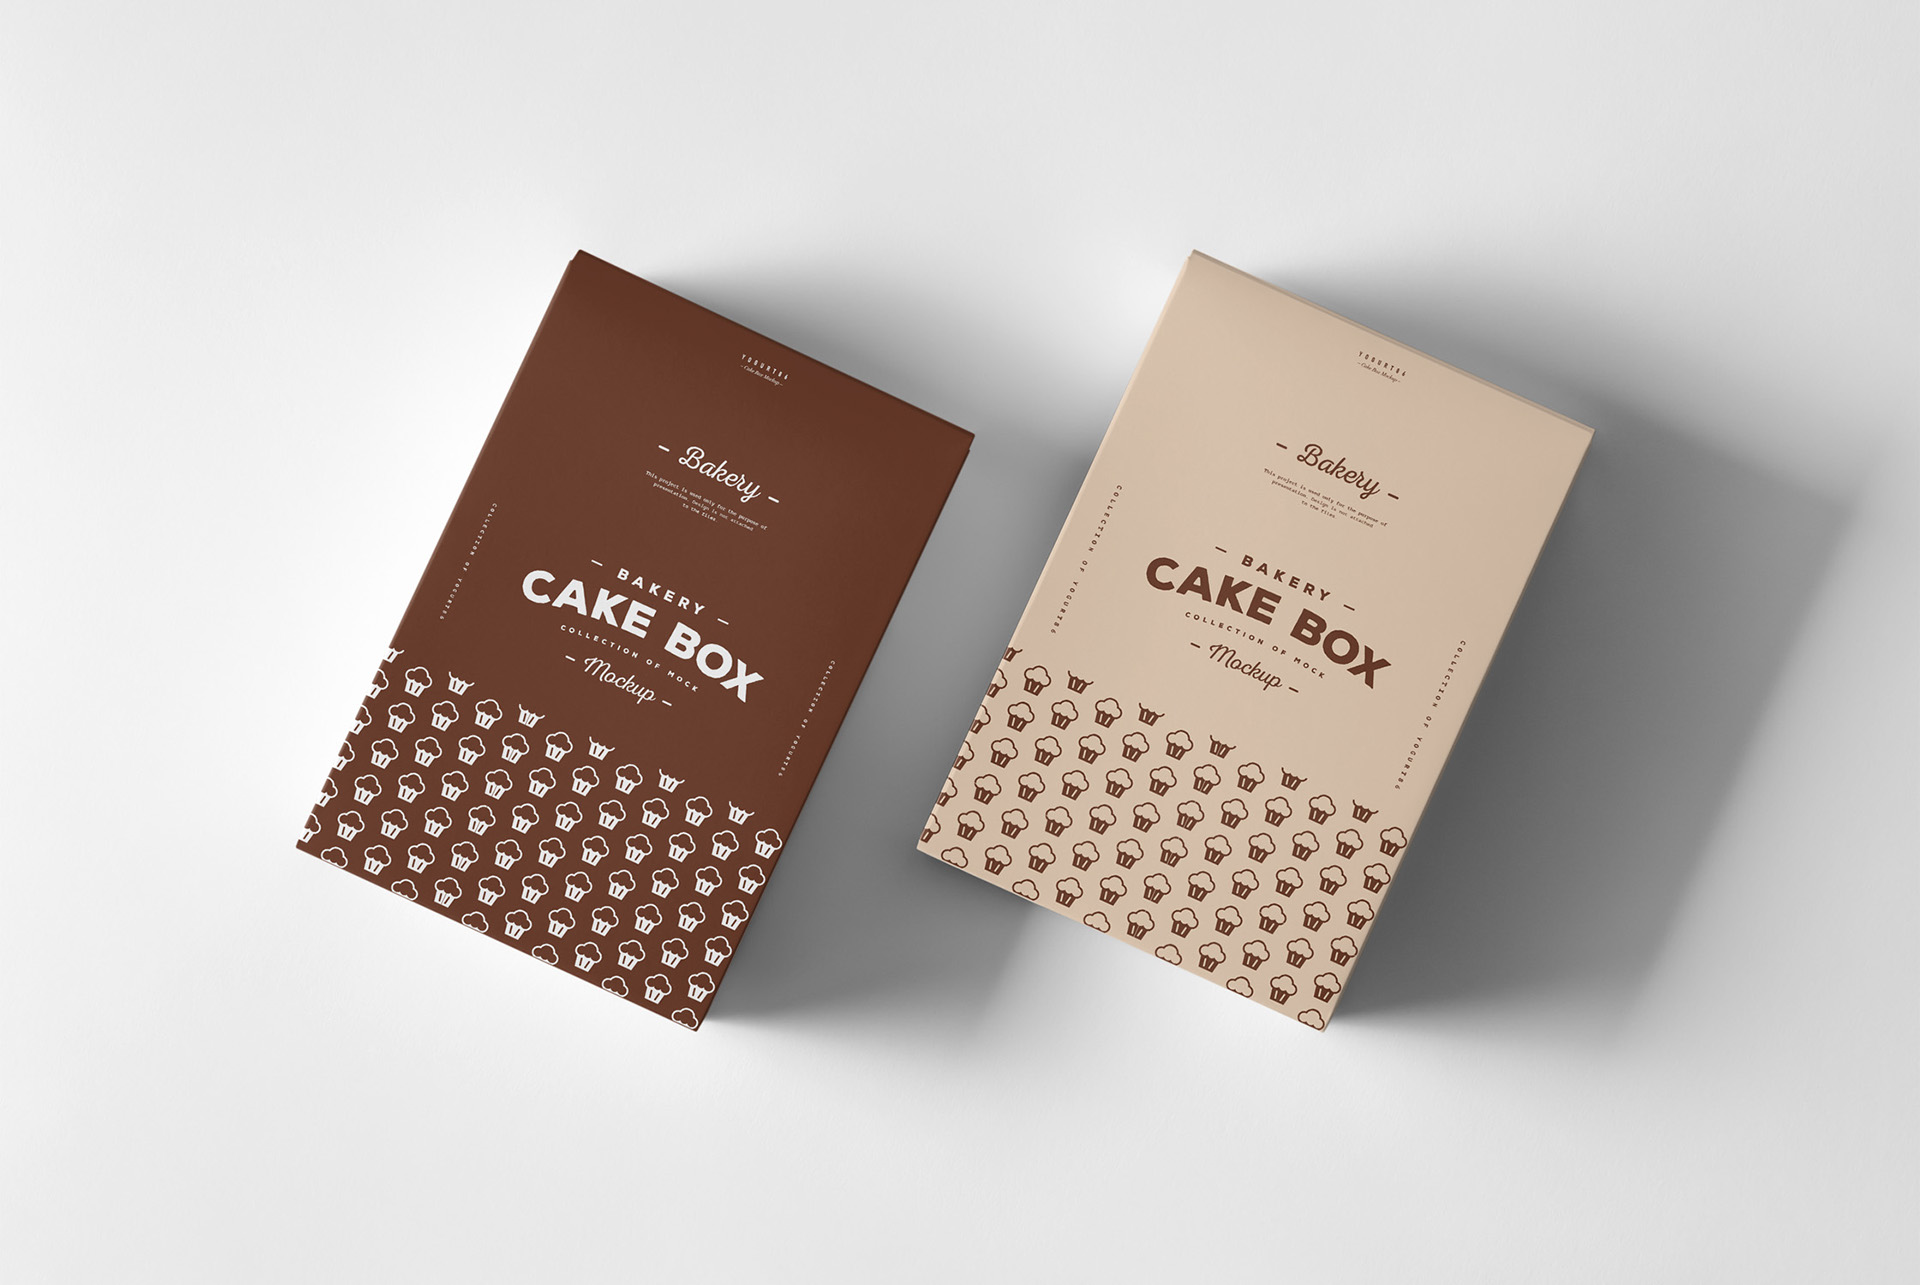 Download 70 Creative Box Packaging Psd Mockups Decolore Net